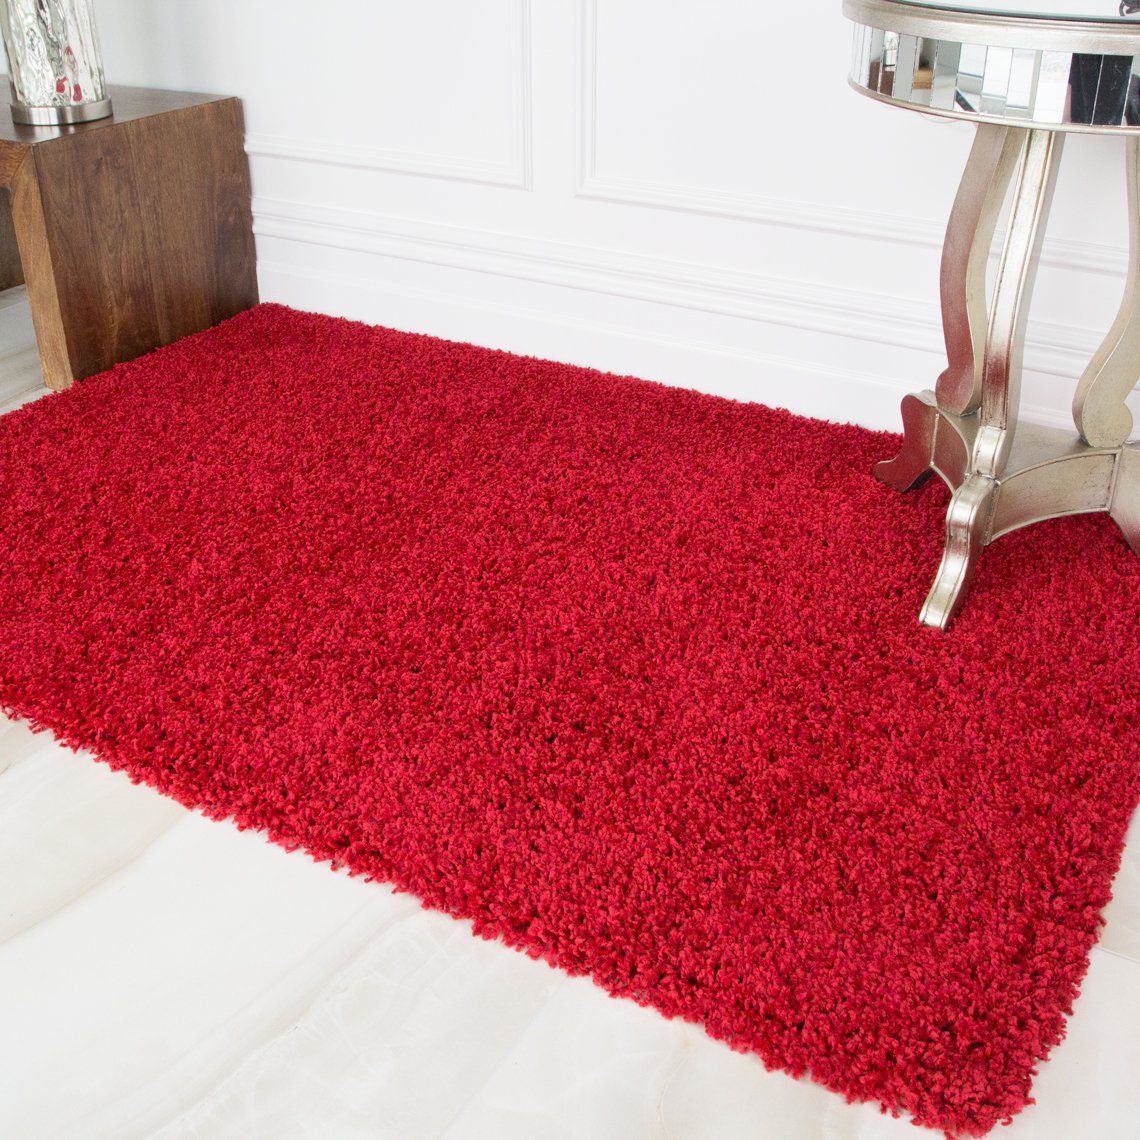 Affordable Soft Shaggy Living Room Rugs - Choose Your Colour